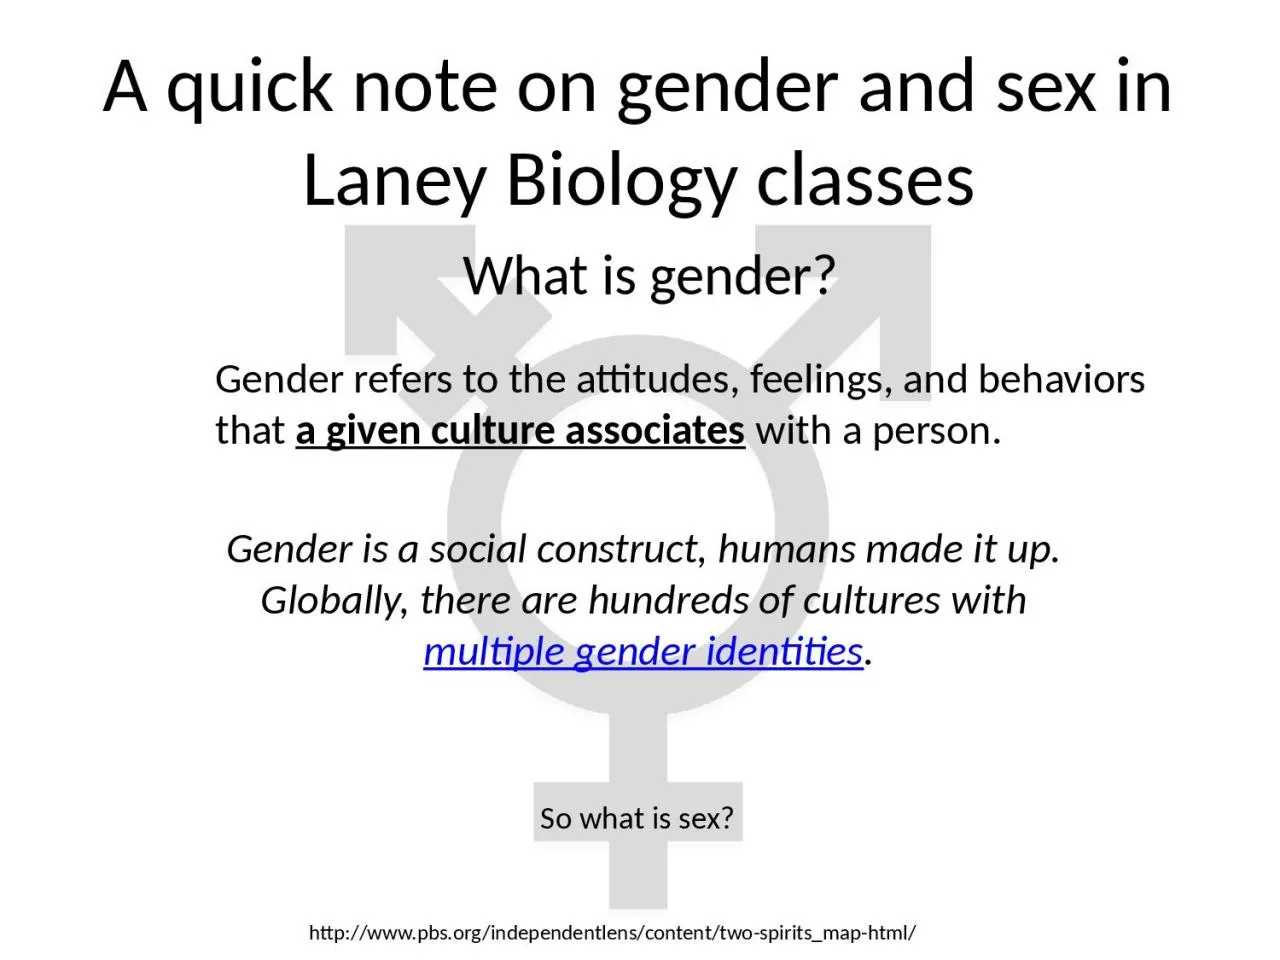 A quick note on gender and sex in Laney Biology classes